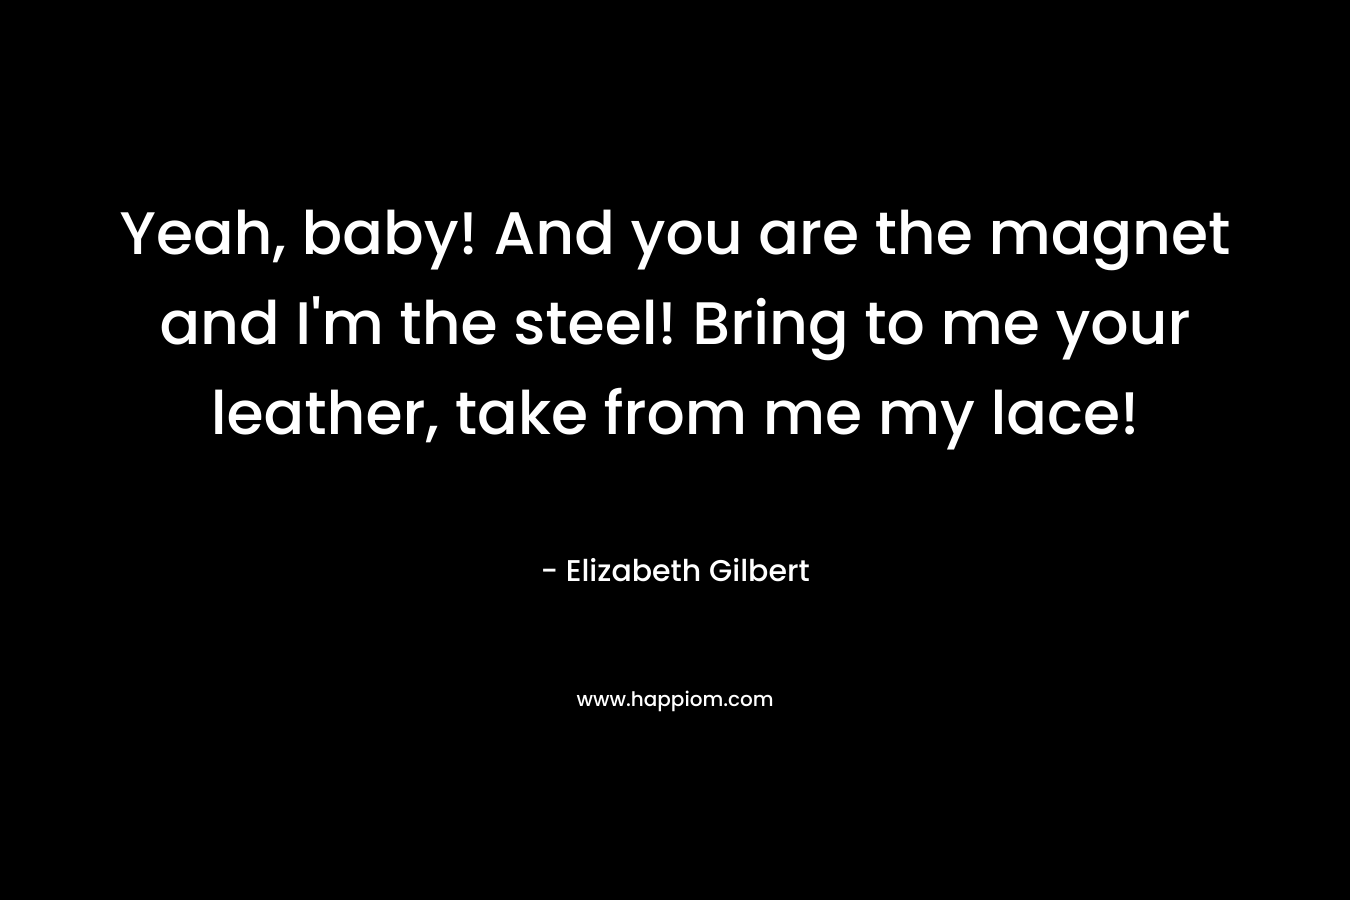 Yeah, baby! And you are the magnet and I’m the steel! Bring to me your leather, take from me my lace! – Elizabeth Gilbert